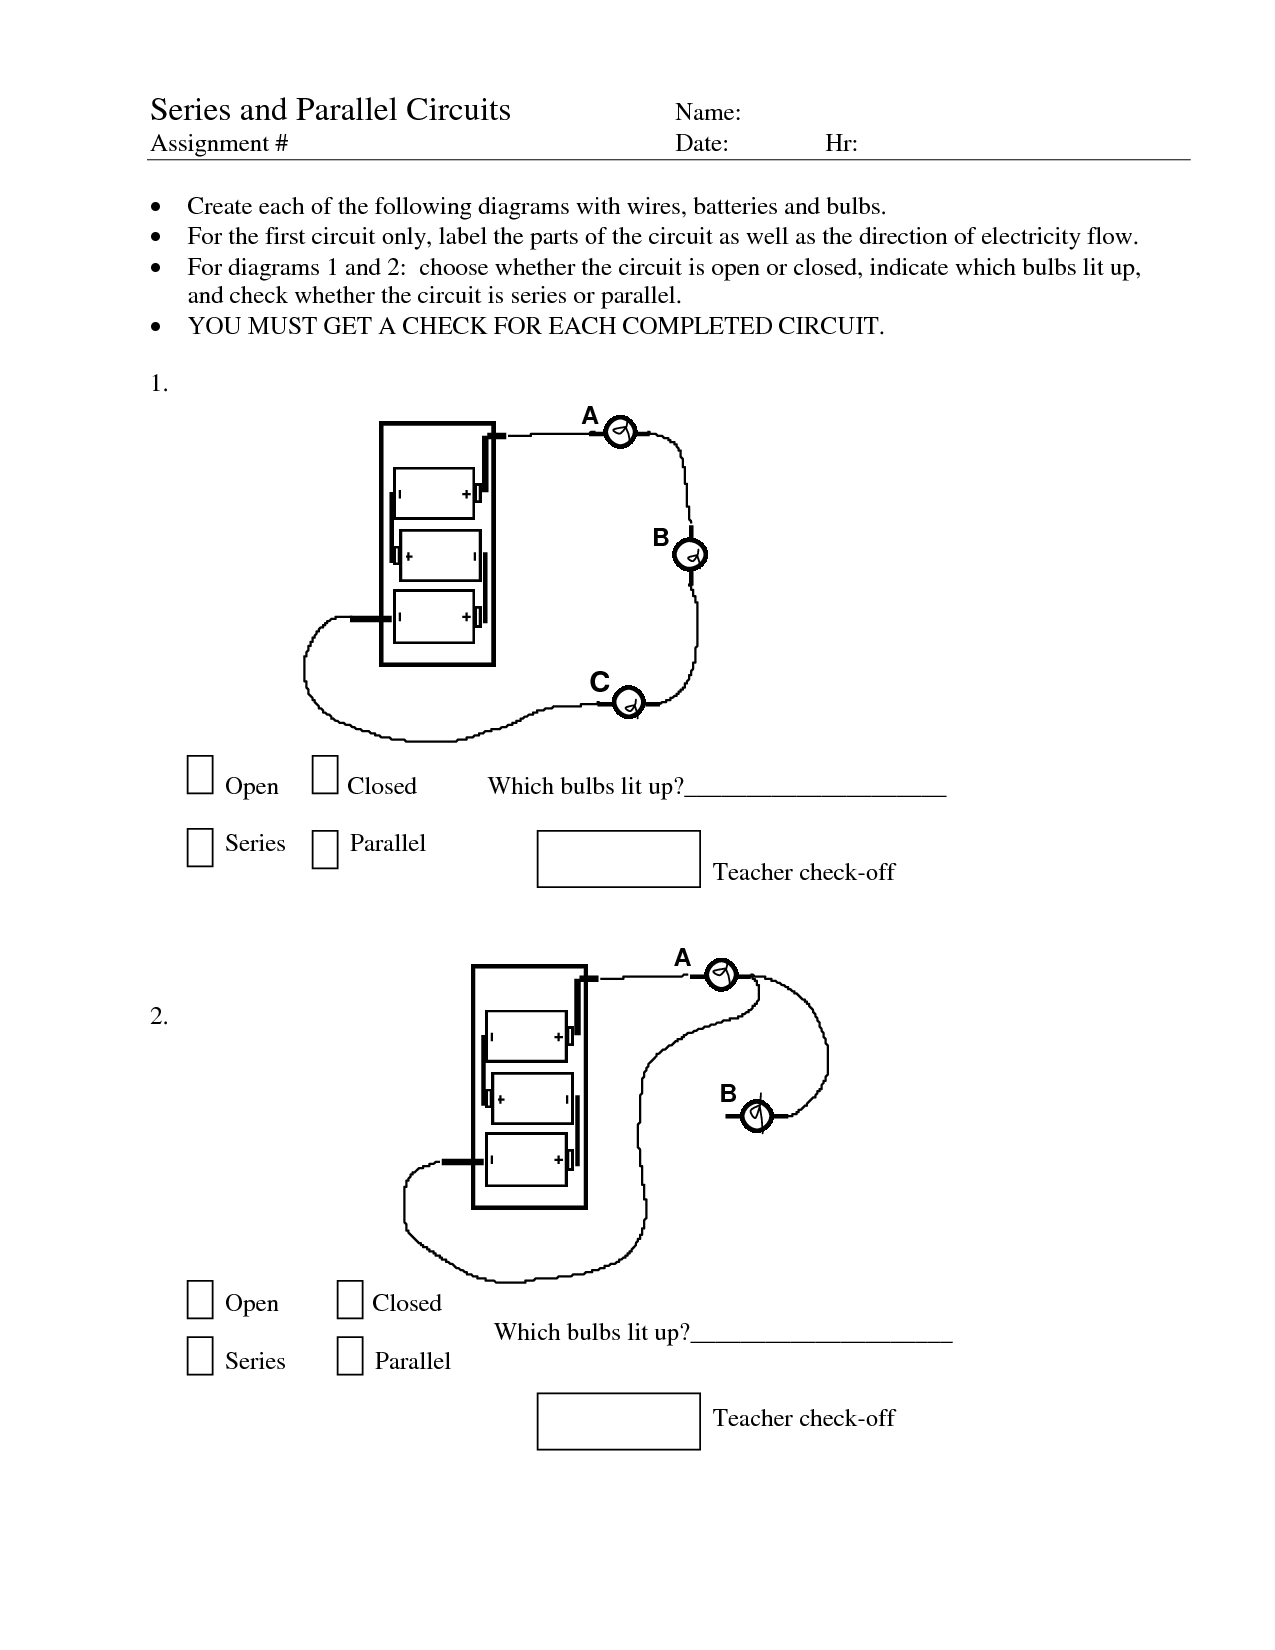 6 Best Images of Open And Closed Circuits Worksheet - Series and